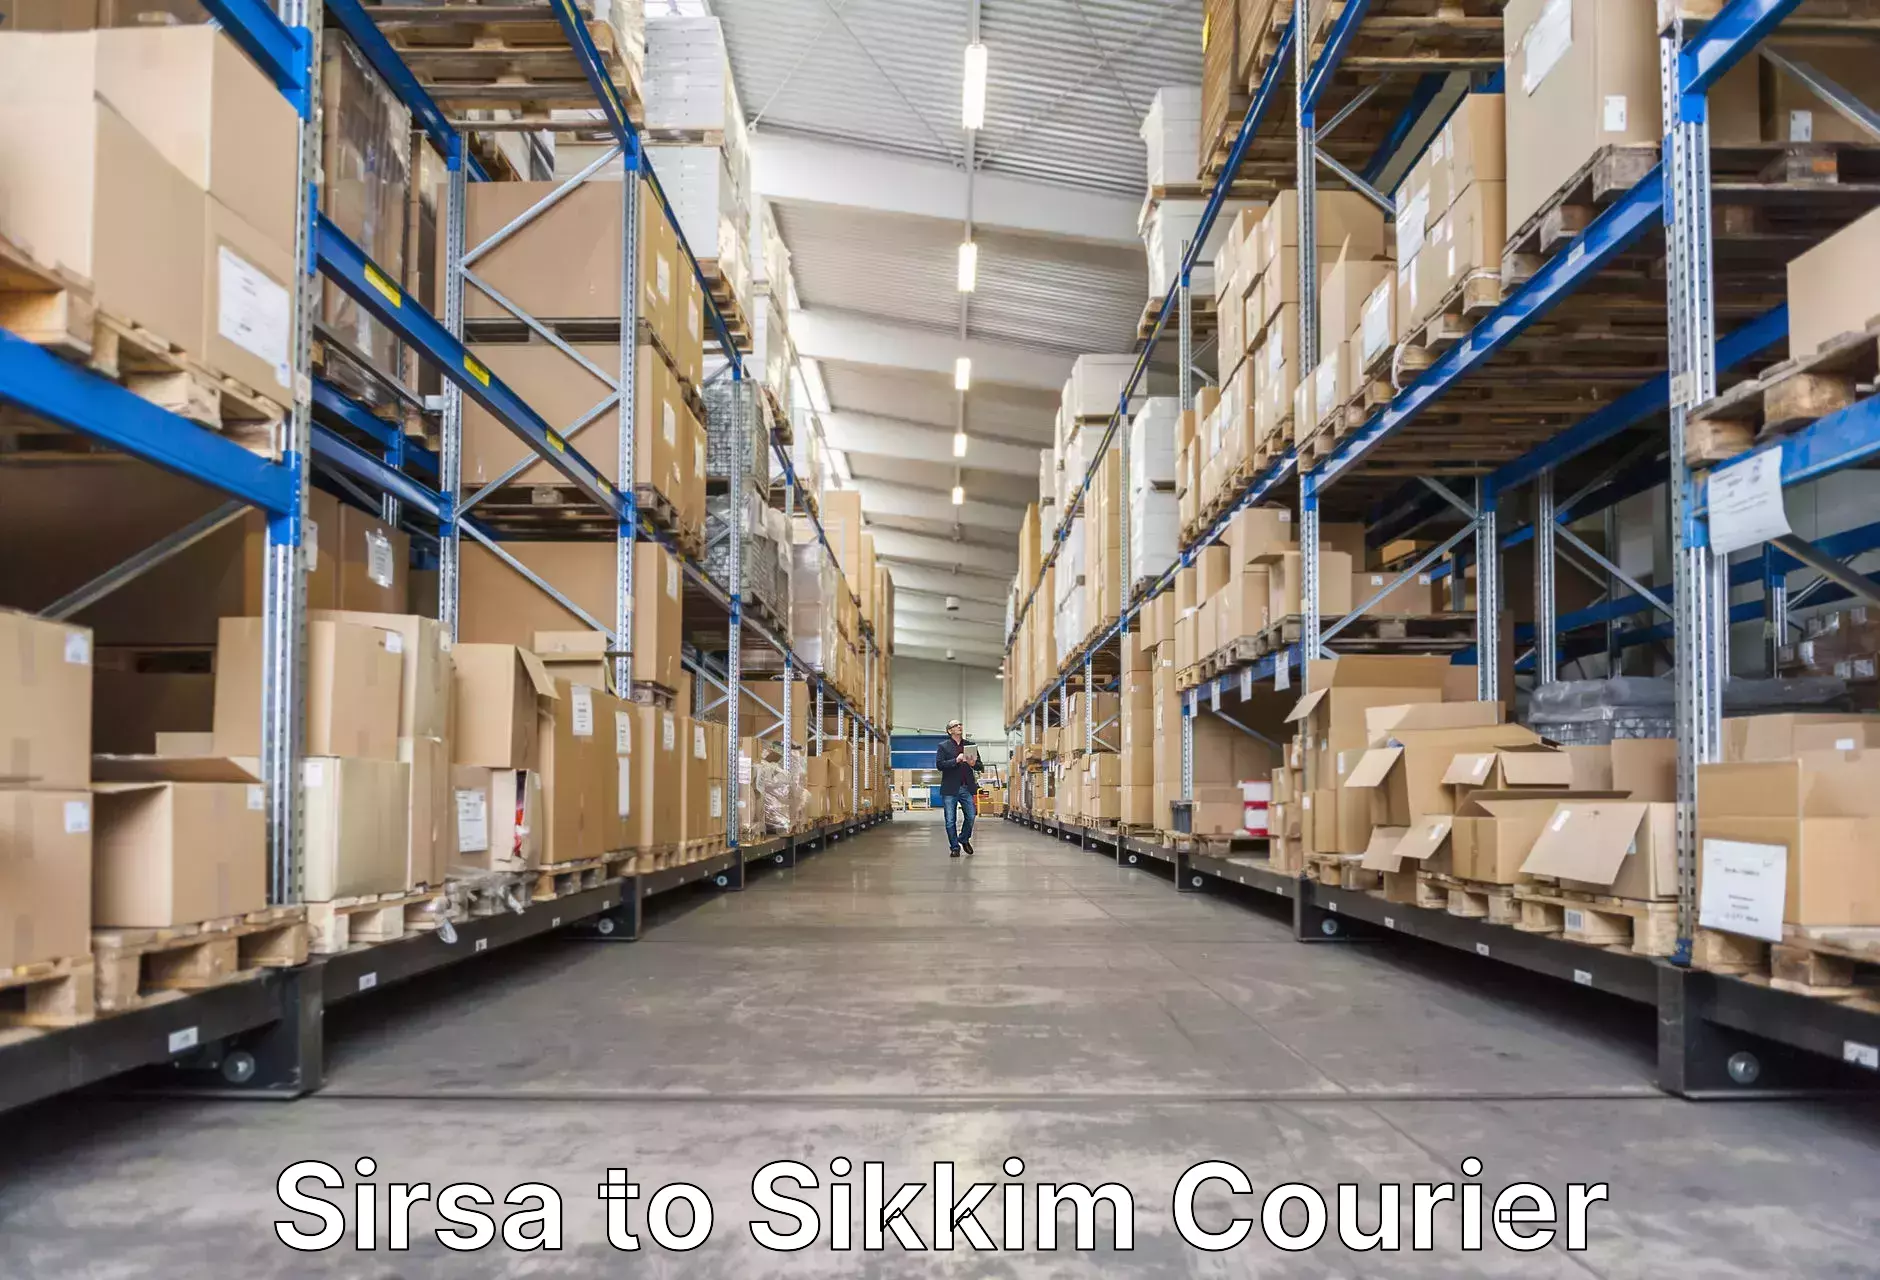 Luggage shipment specialists Sirsa to Sikkim